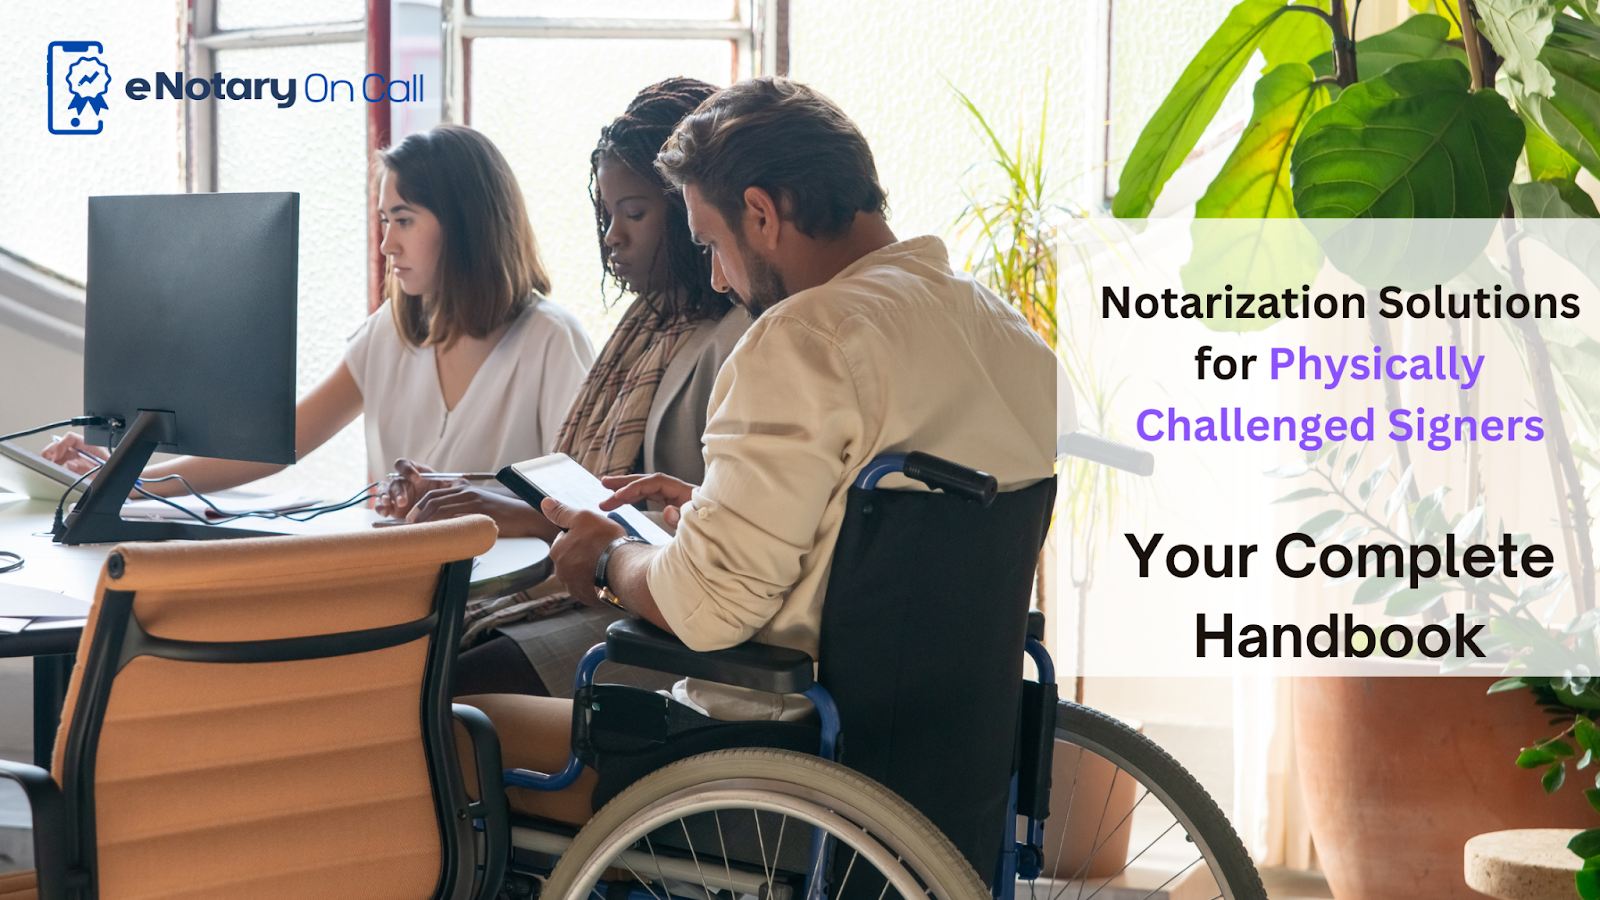 Notarization Solutions for Physically Challenged Signers: Your Complete Handbook